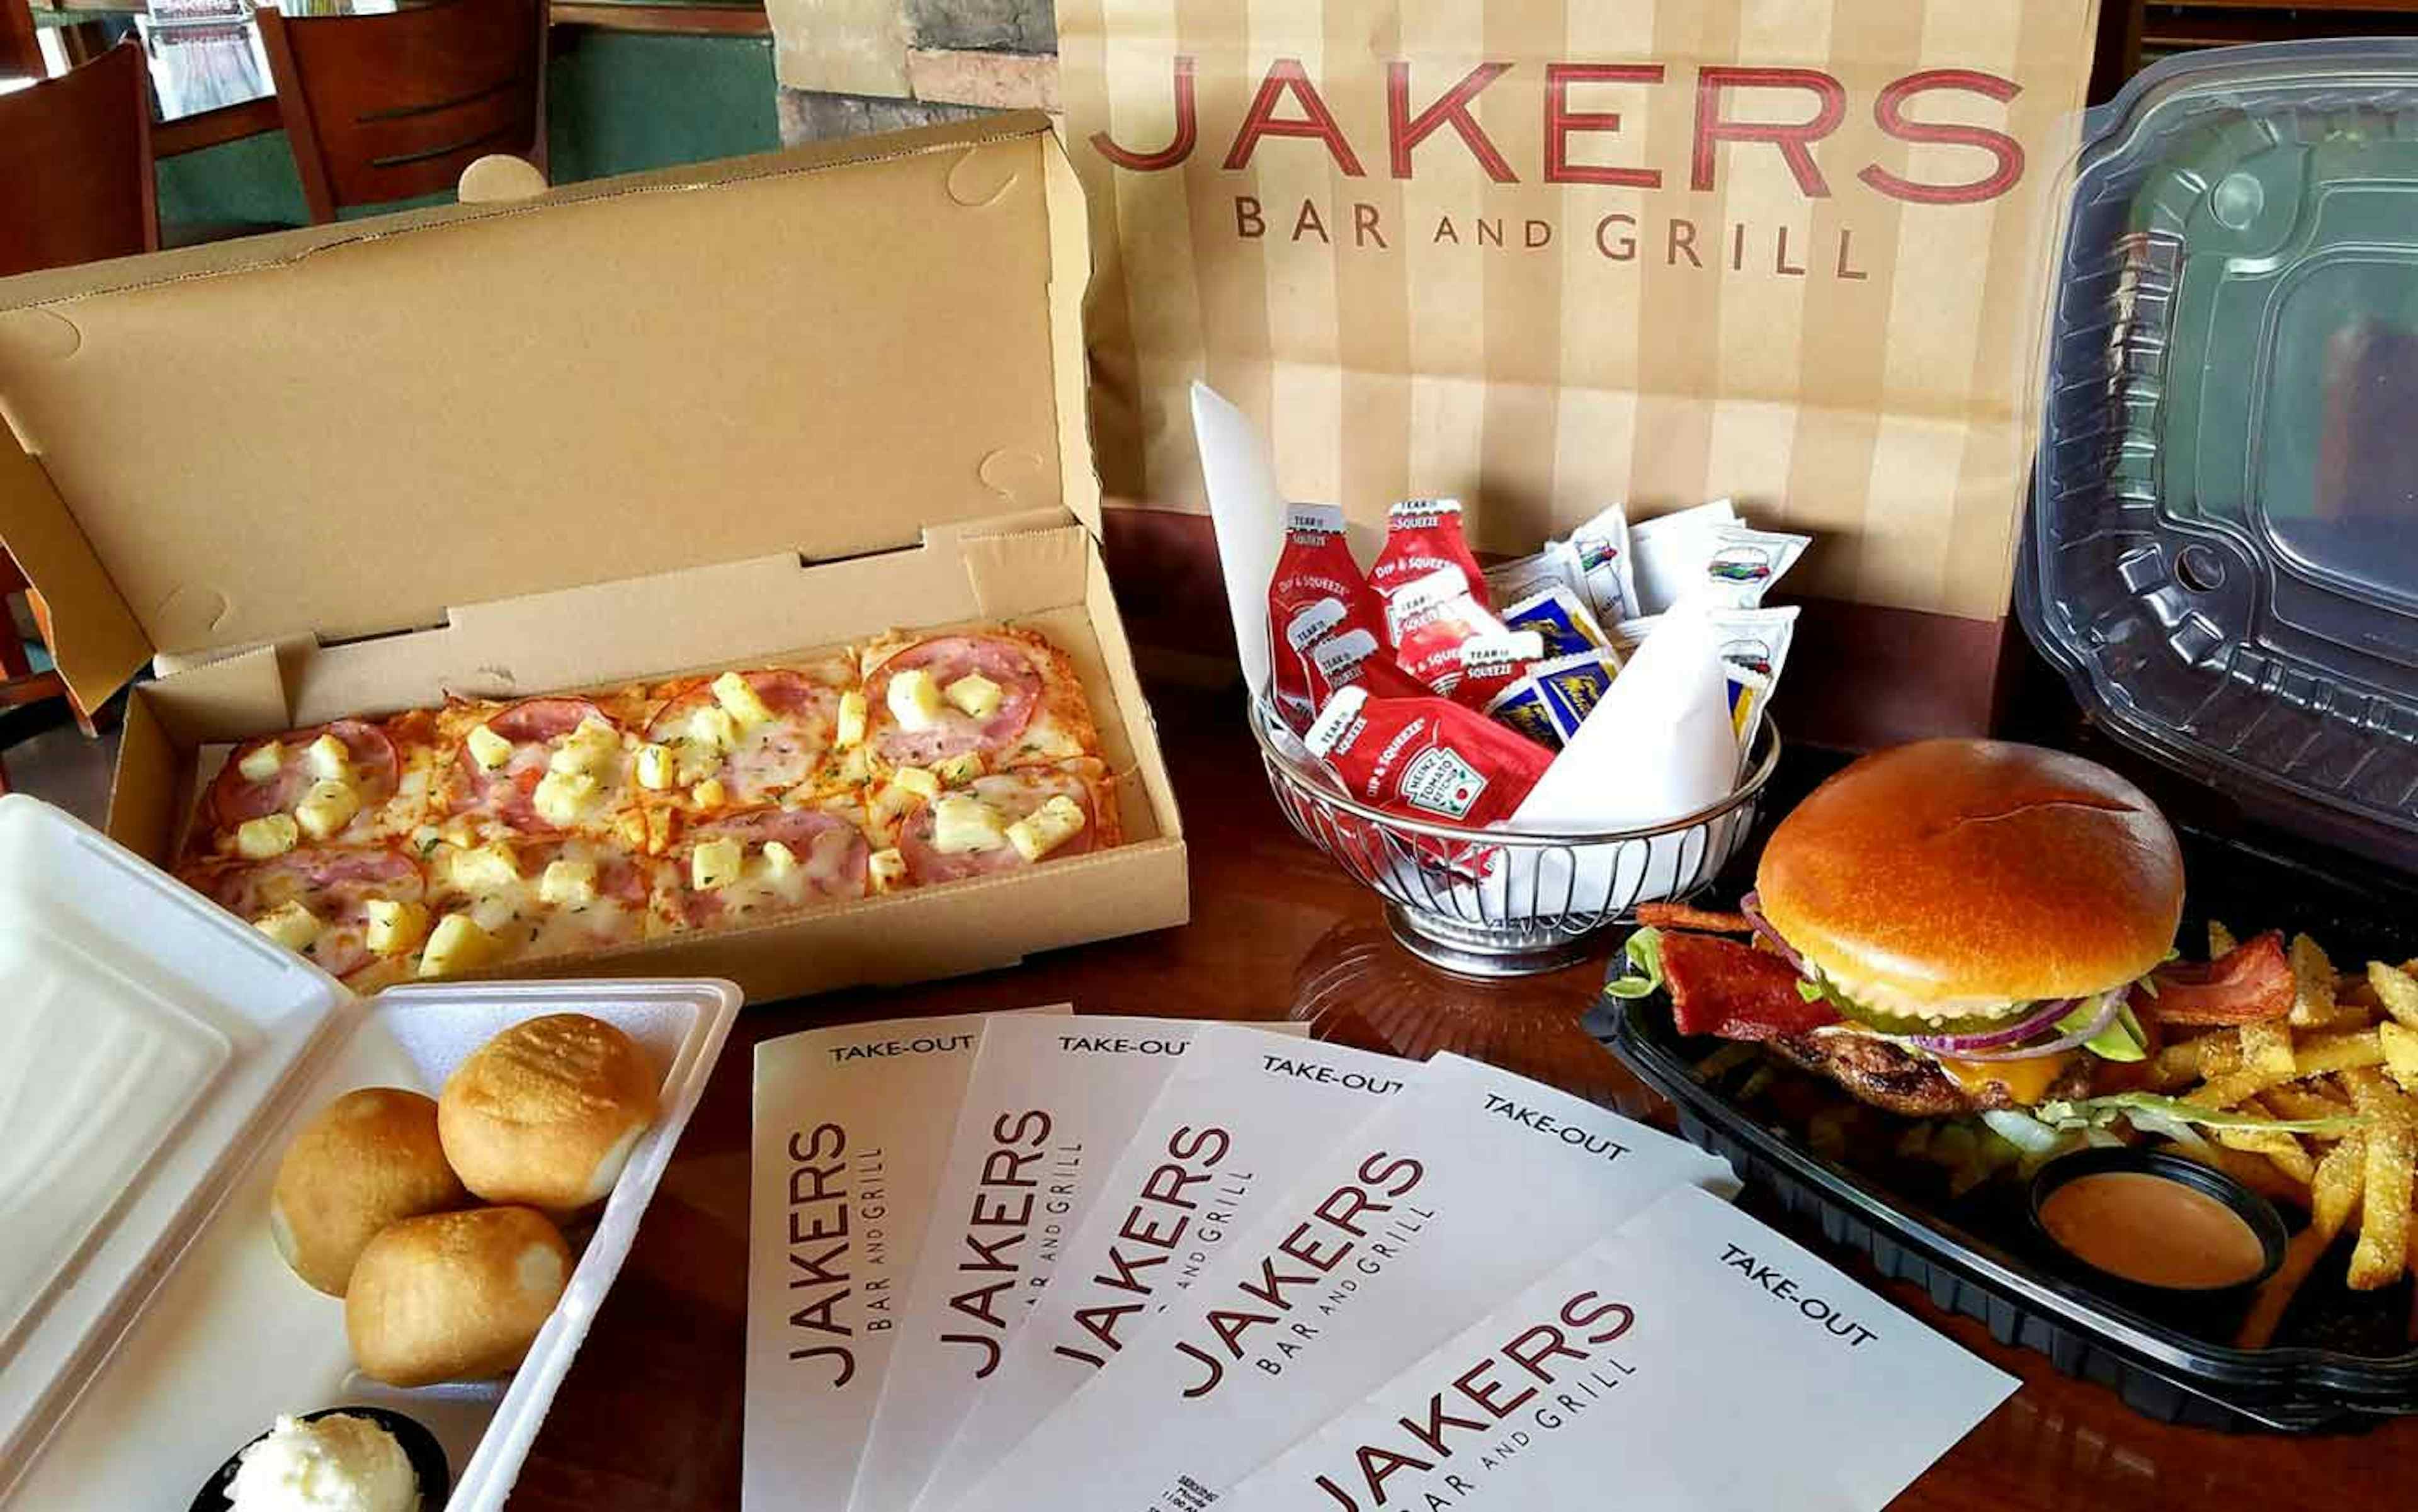 Allow Jakers to cater your event, so you can focus on the fun. 